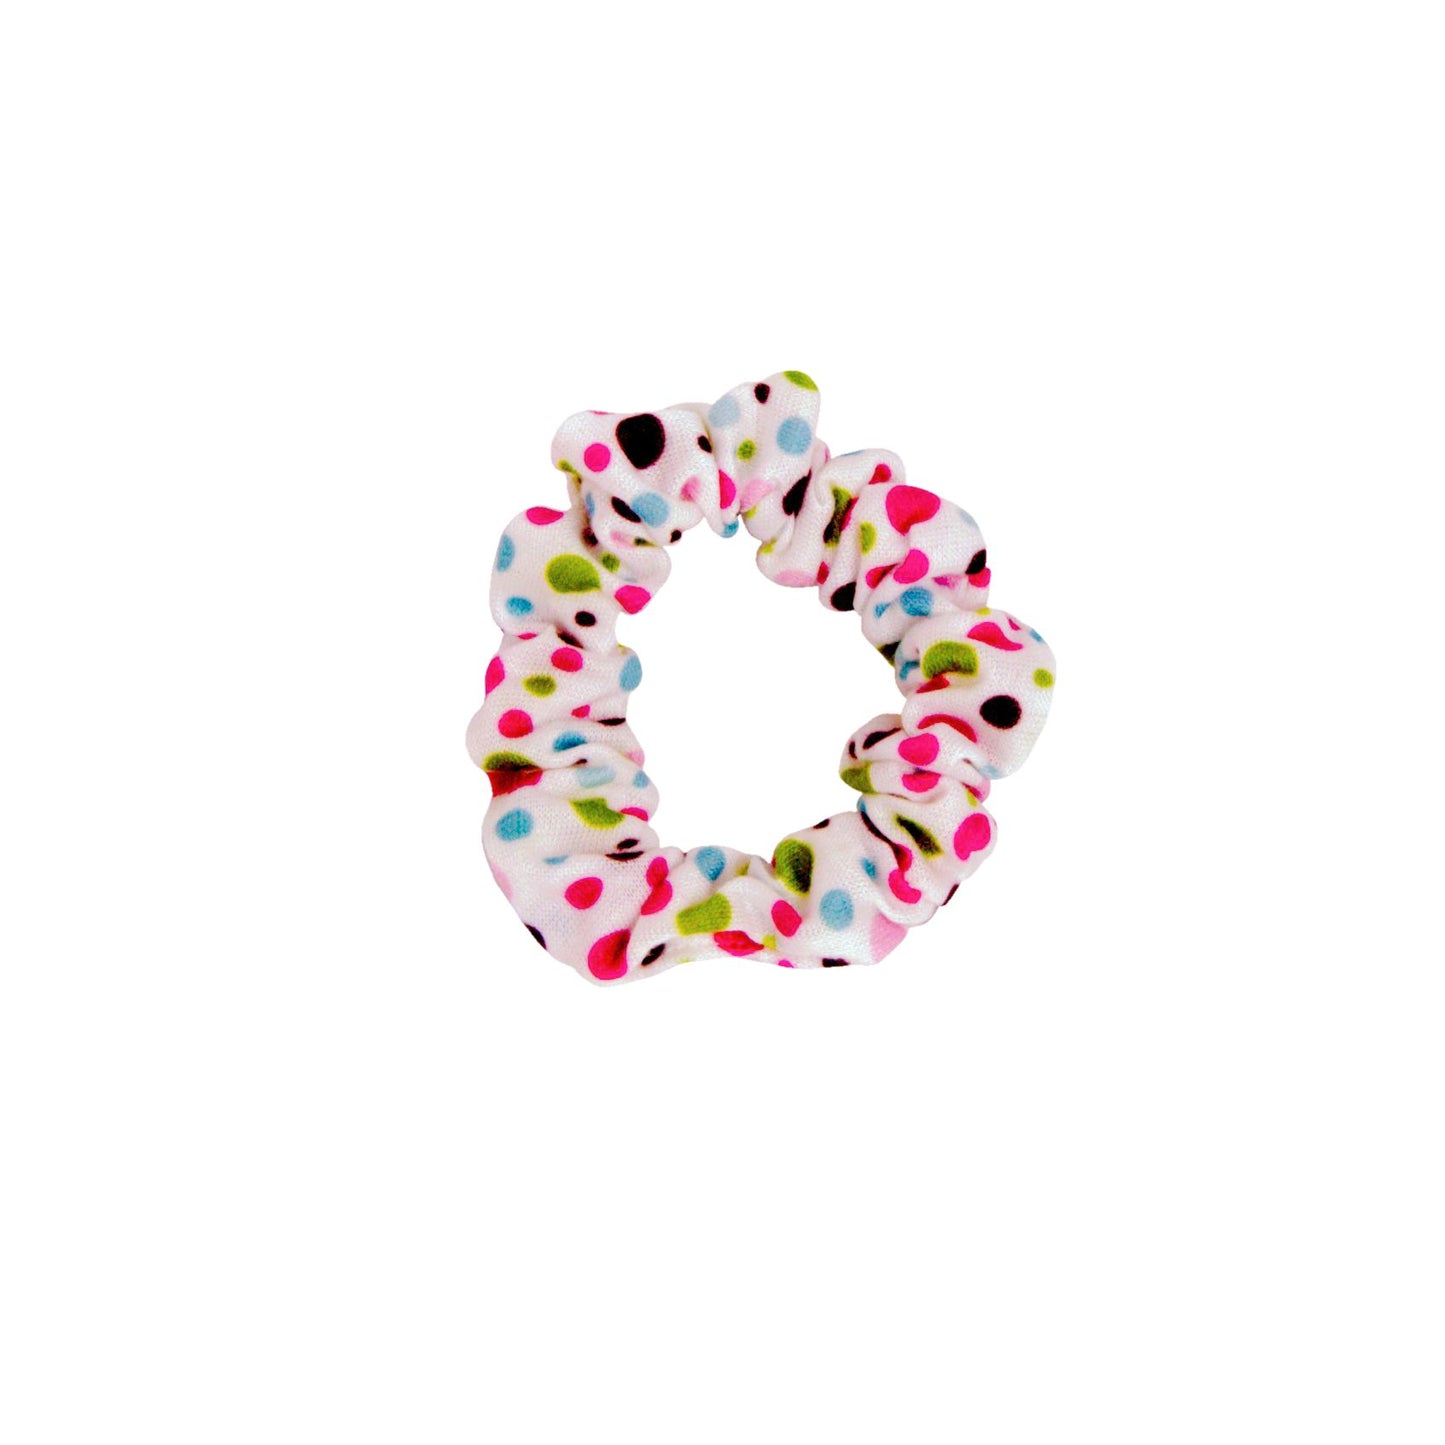 Amelia Beauty, Medium Pastel Dot Jersey Scrunchies, 2.5in Diameter, Gentle on Hair, Strong Hold, No Snag, No Dents or Creases. 10 Pack